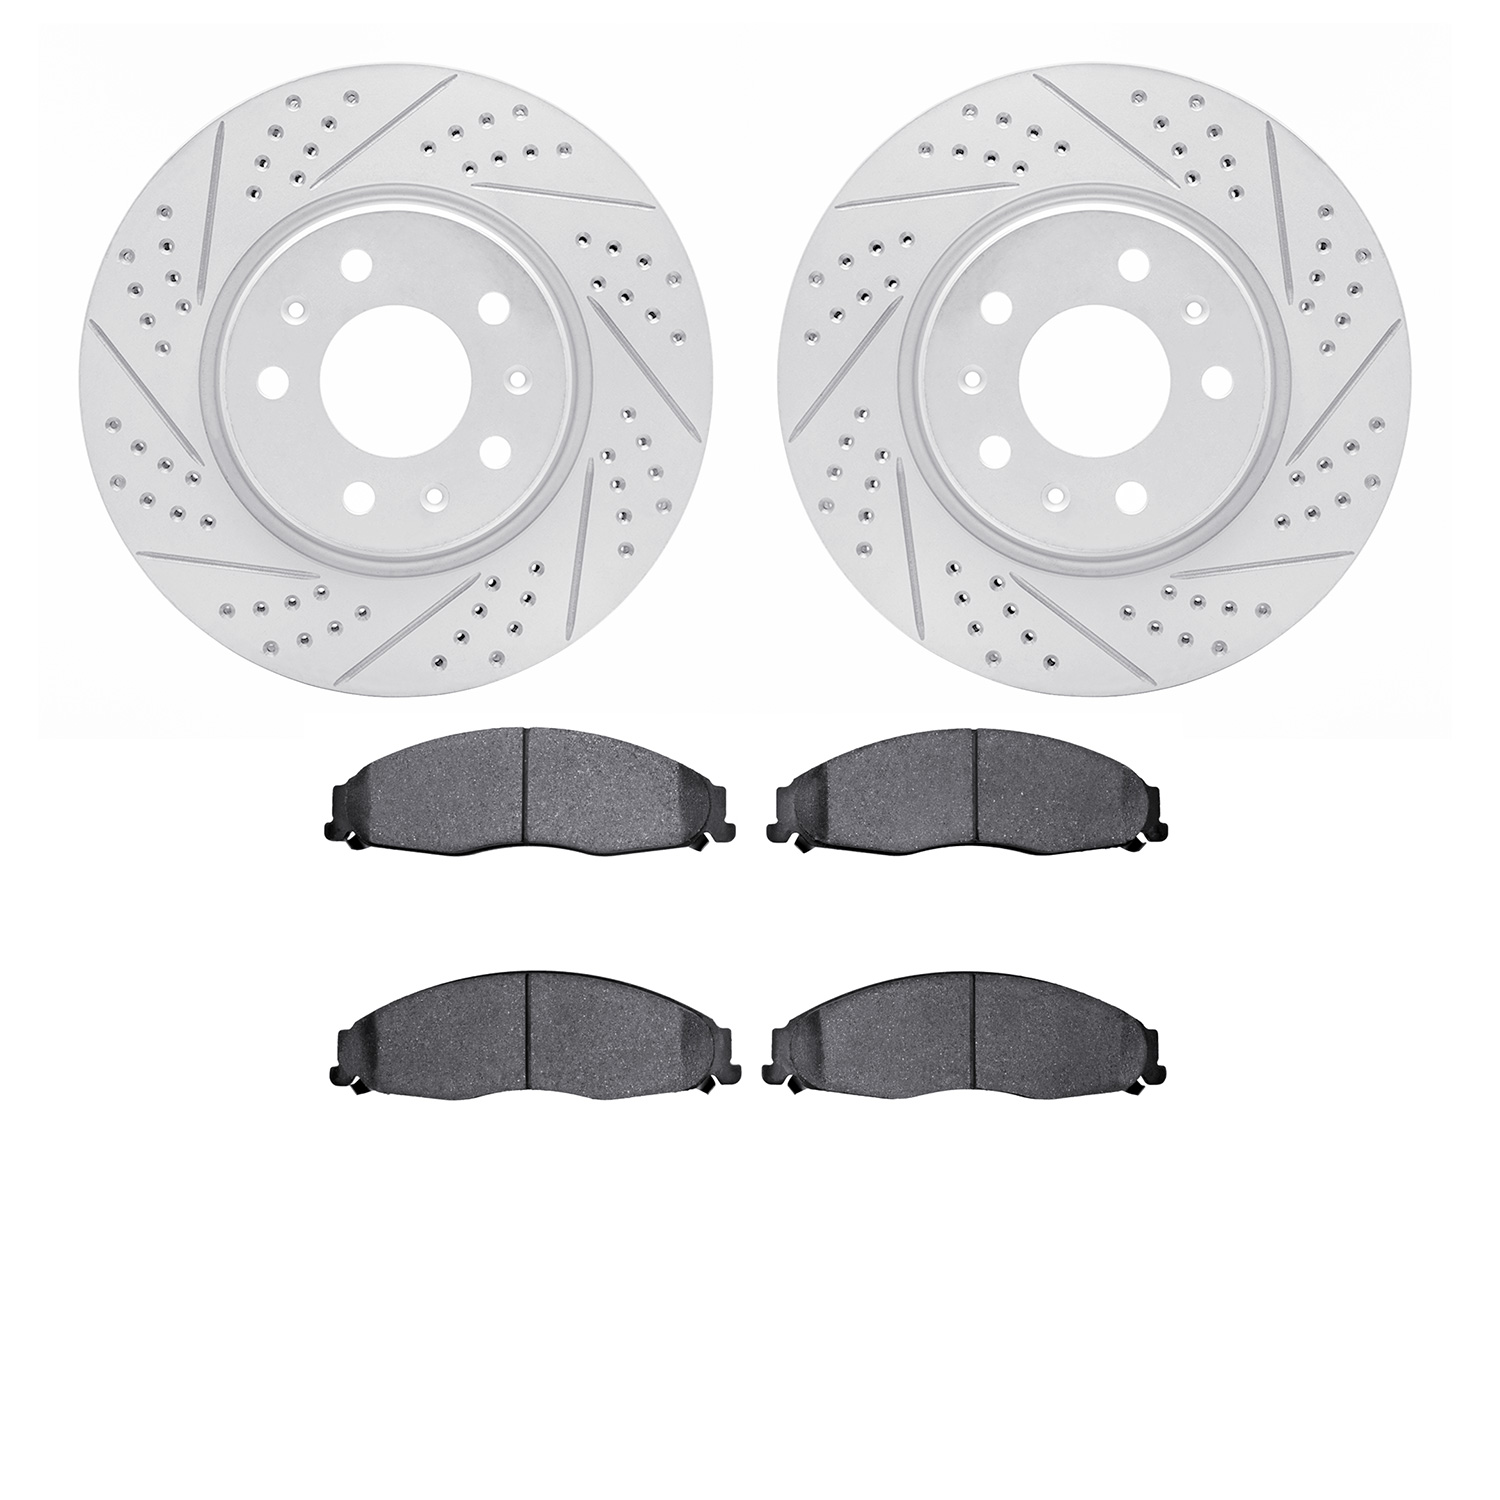 2502-46005 Geoperformance Drilled/Slotted Rotors w/5000 Advanced Brake Pads Kit, 2003-2005 GM, Position: Front